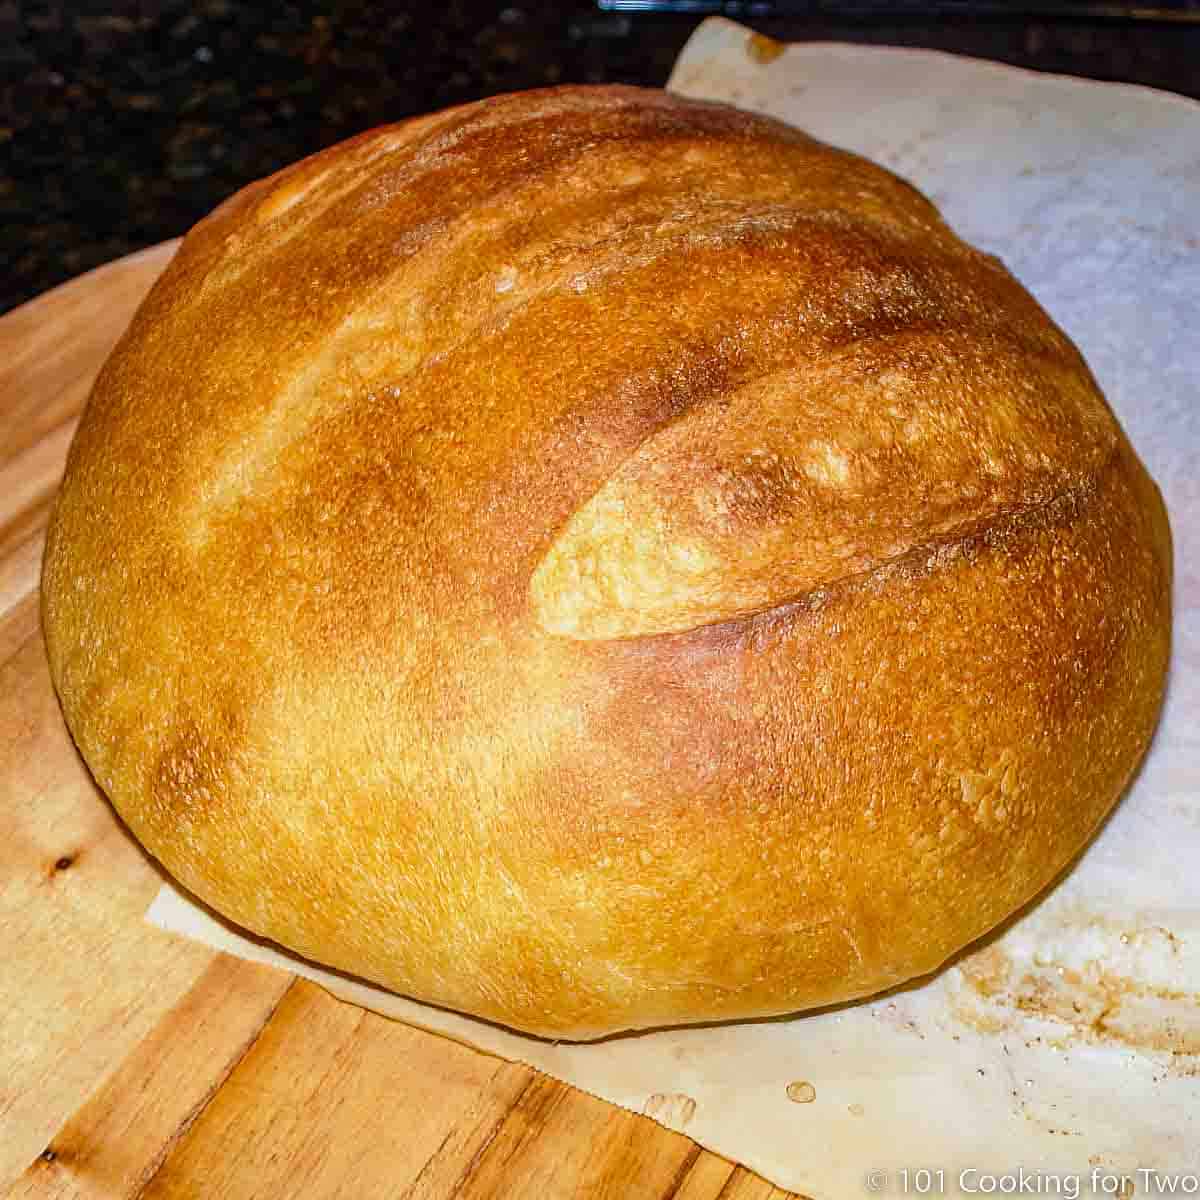 Baking 101: How I Test My Oven with Sliced Bread - Joy the Baker